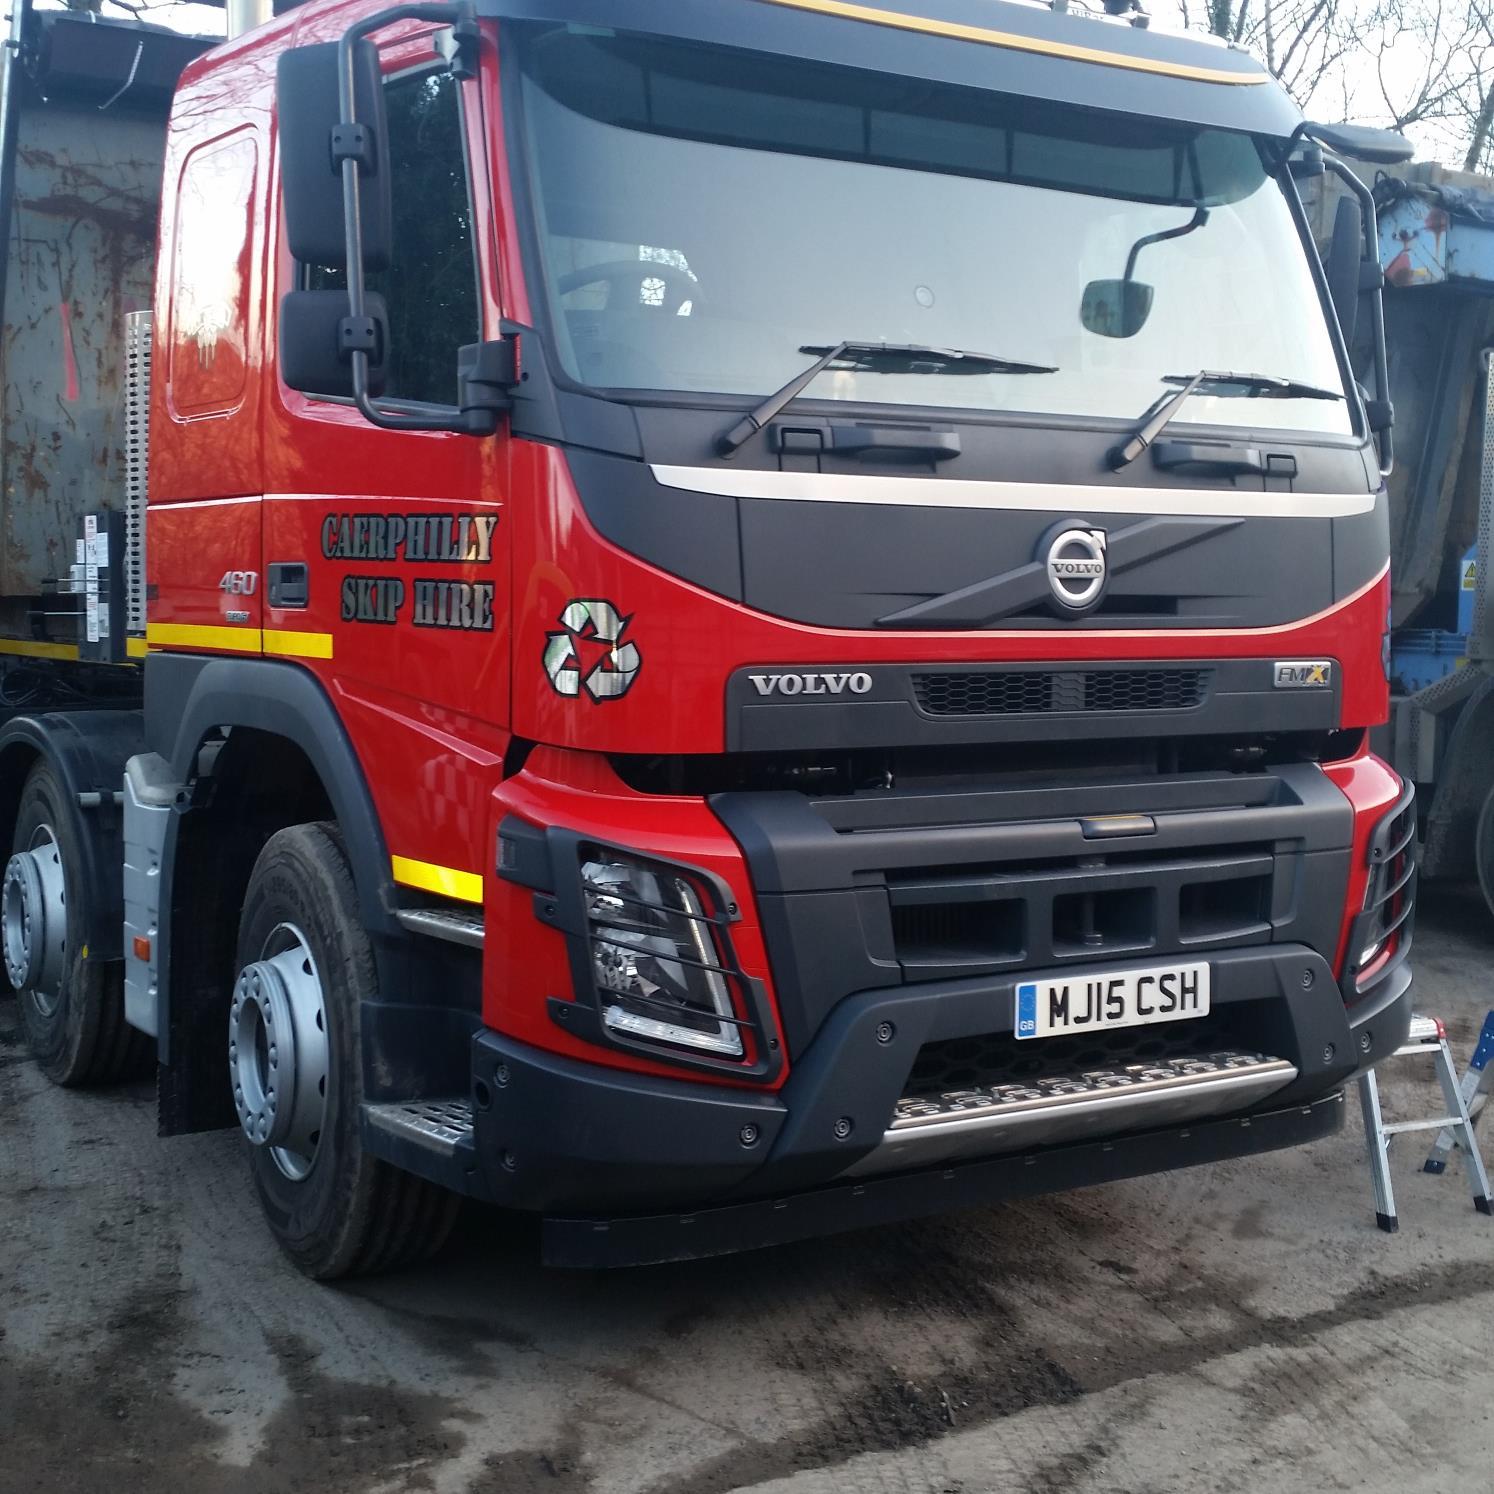 Great Skip Hire, Roll-On, Roll-Off Containers, Aggregate Supplies & Tipper Hire in South Wales #skiphirecardiff #cardiffskiphire #skiphire #caerphillyskiphire